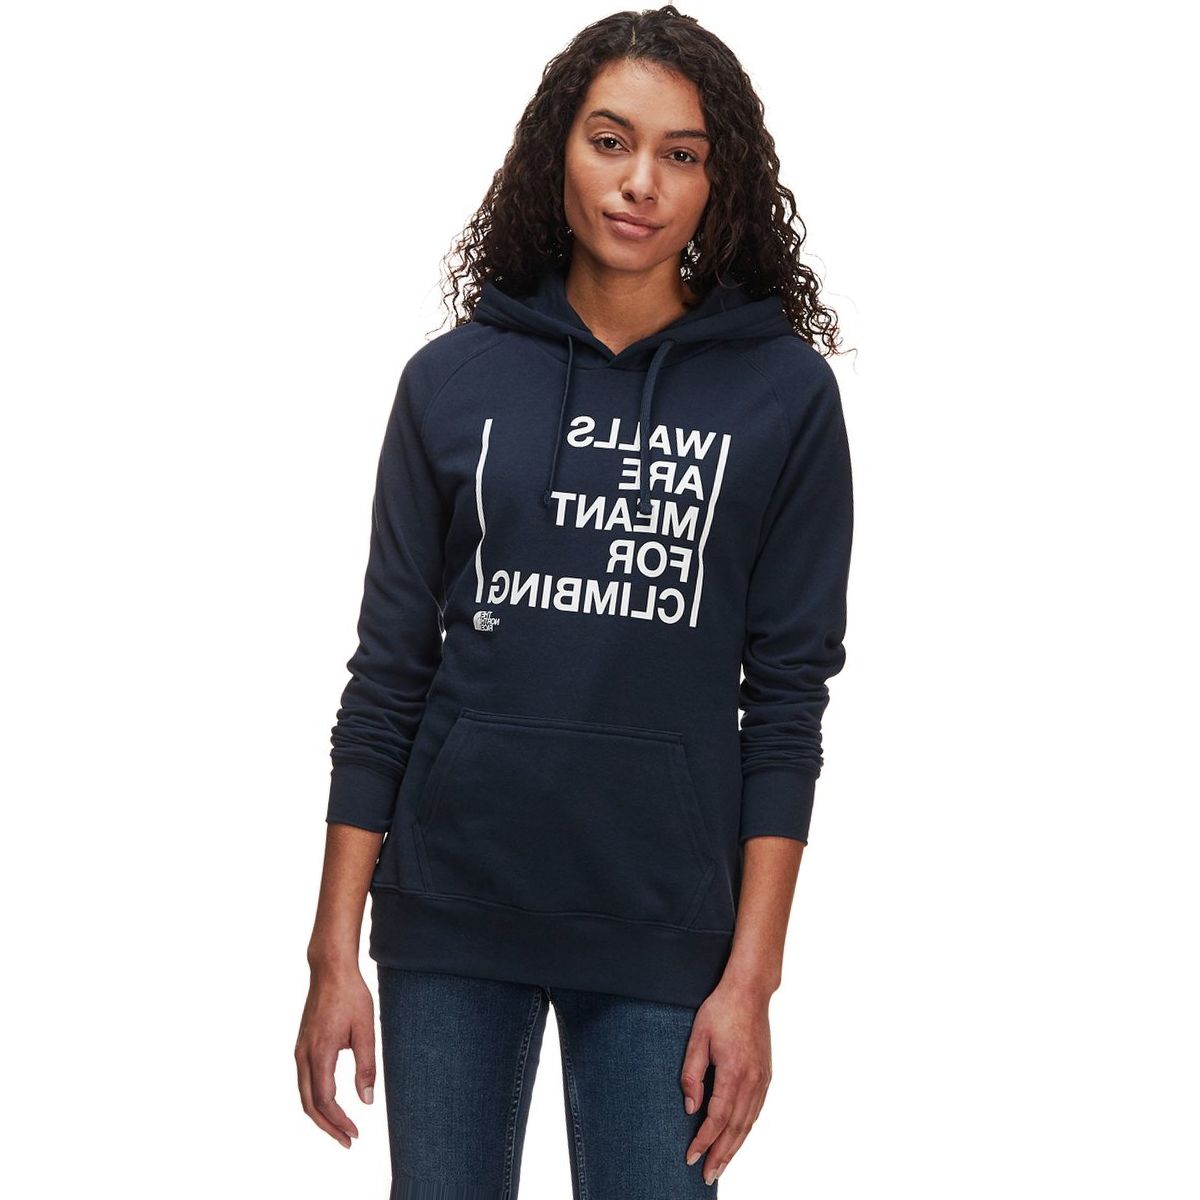 The North Face Meant To Be Climbed Pullover Hoodie - Women's